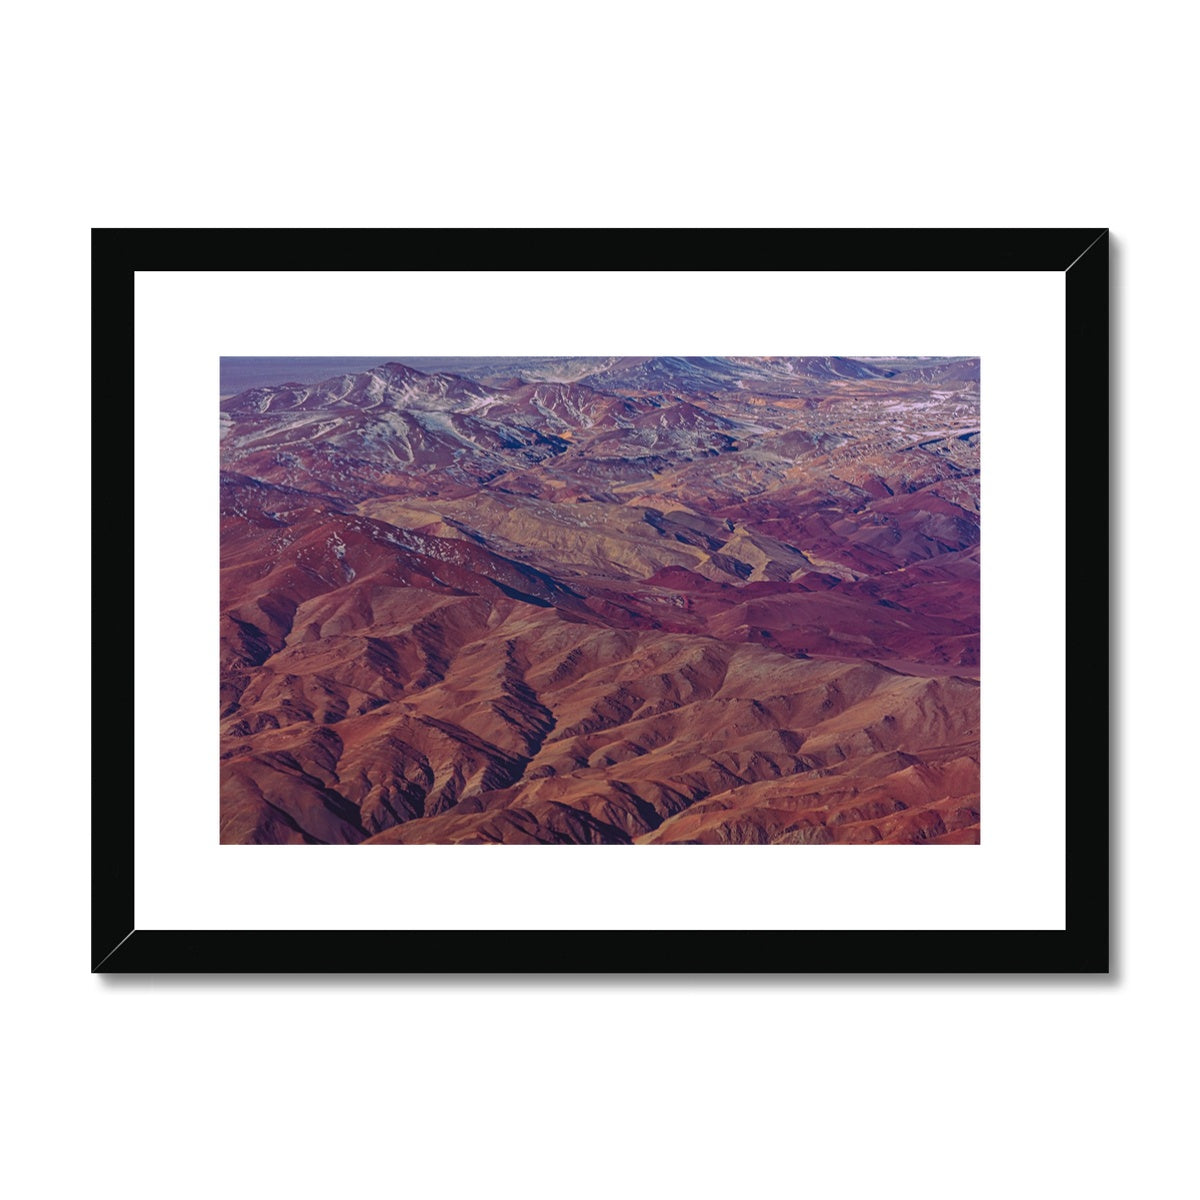 A red carpet Framed & Mounted Print